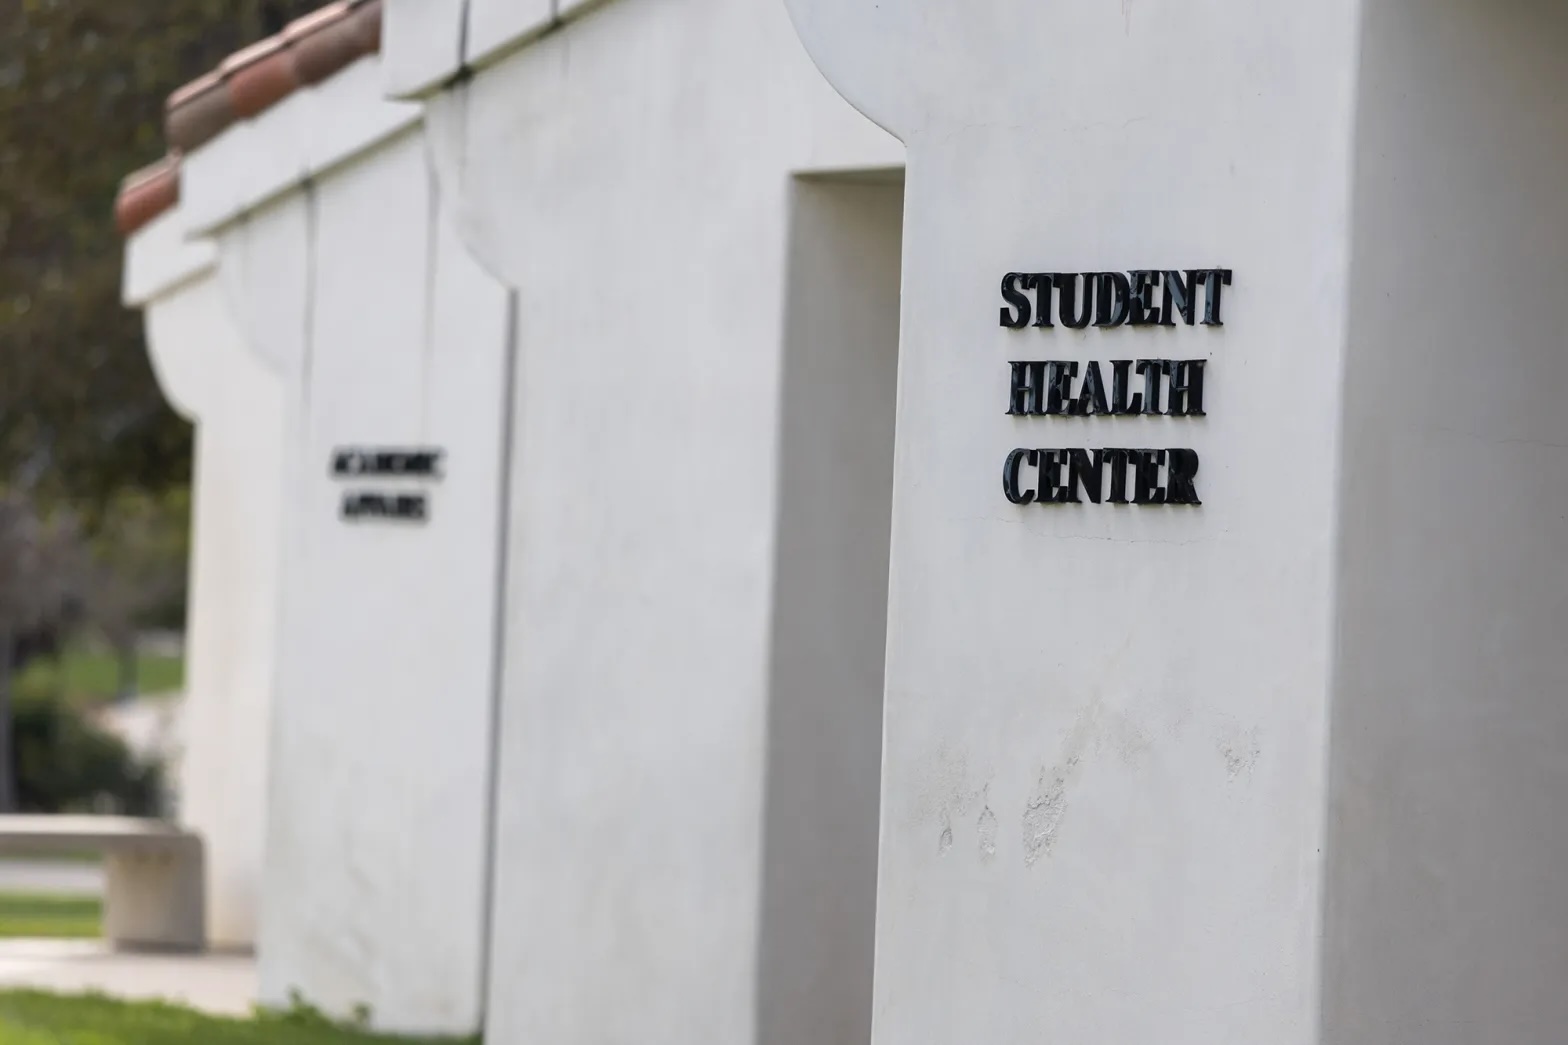 The outside of a white building with "student health center" written on the wall.